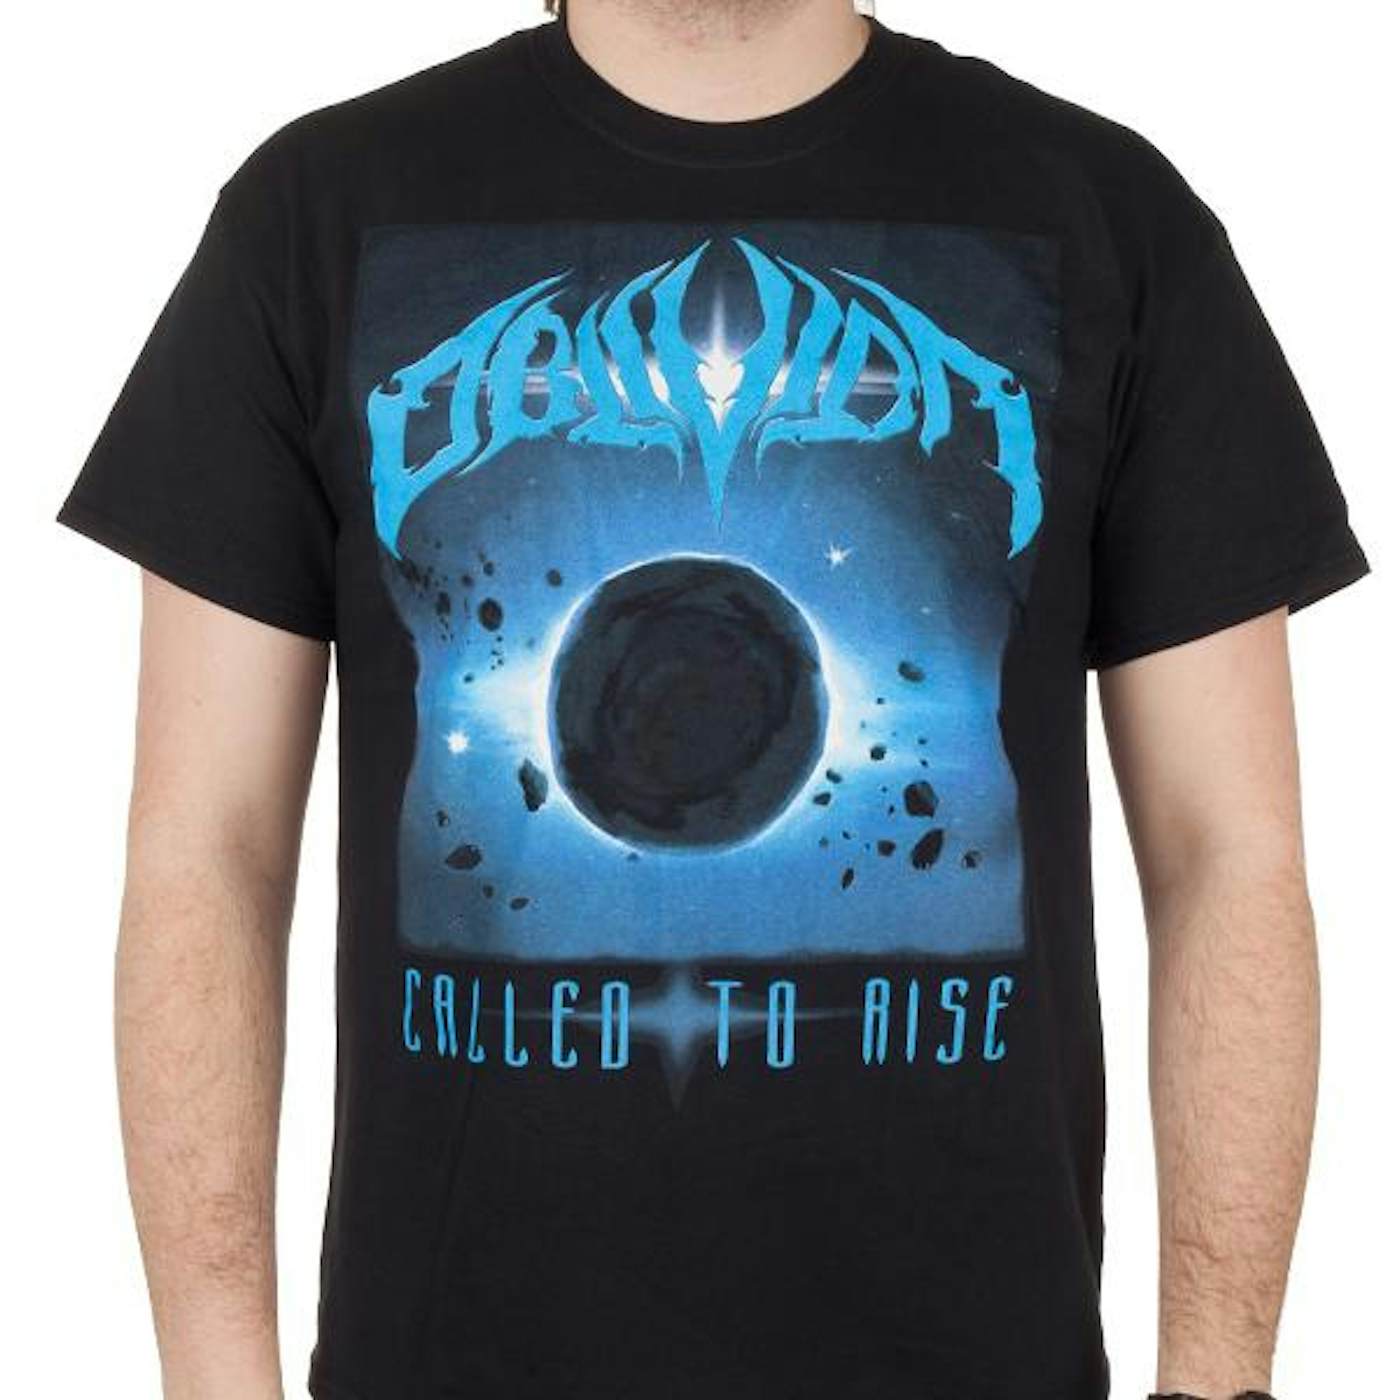 Oblivion "Called To Rise" T-Shirt